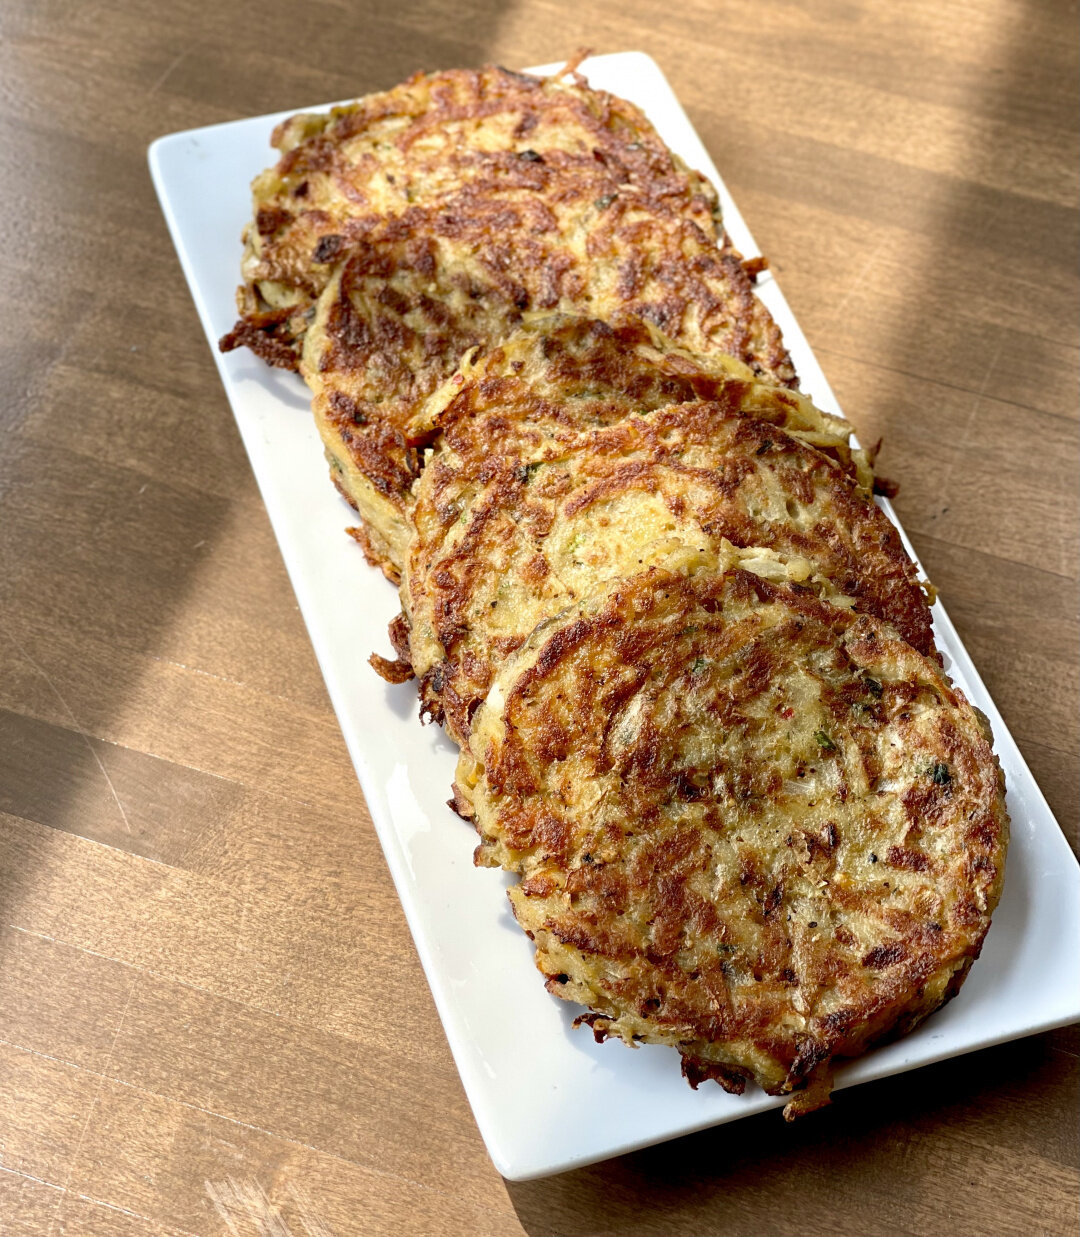 We recommend adding latkes to your order! We also recommend adding them to your sandwiches!